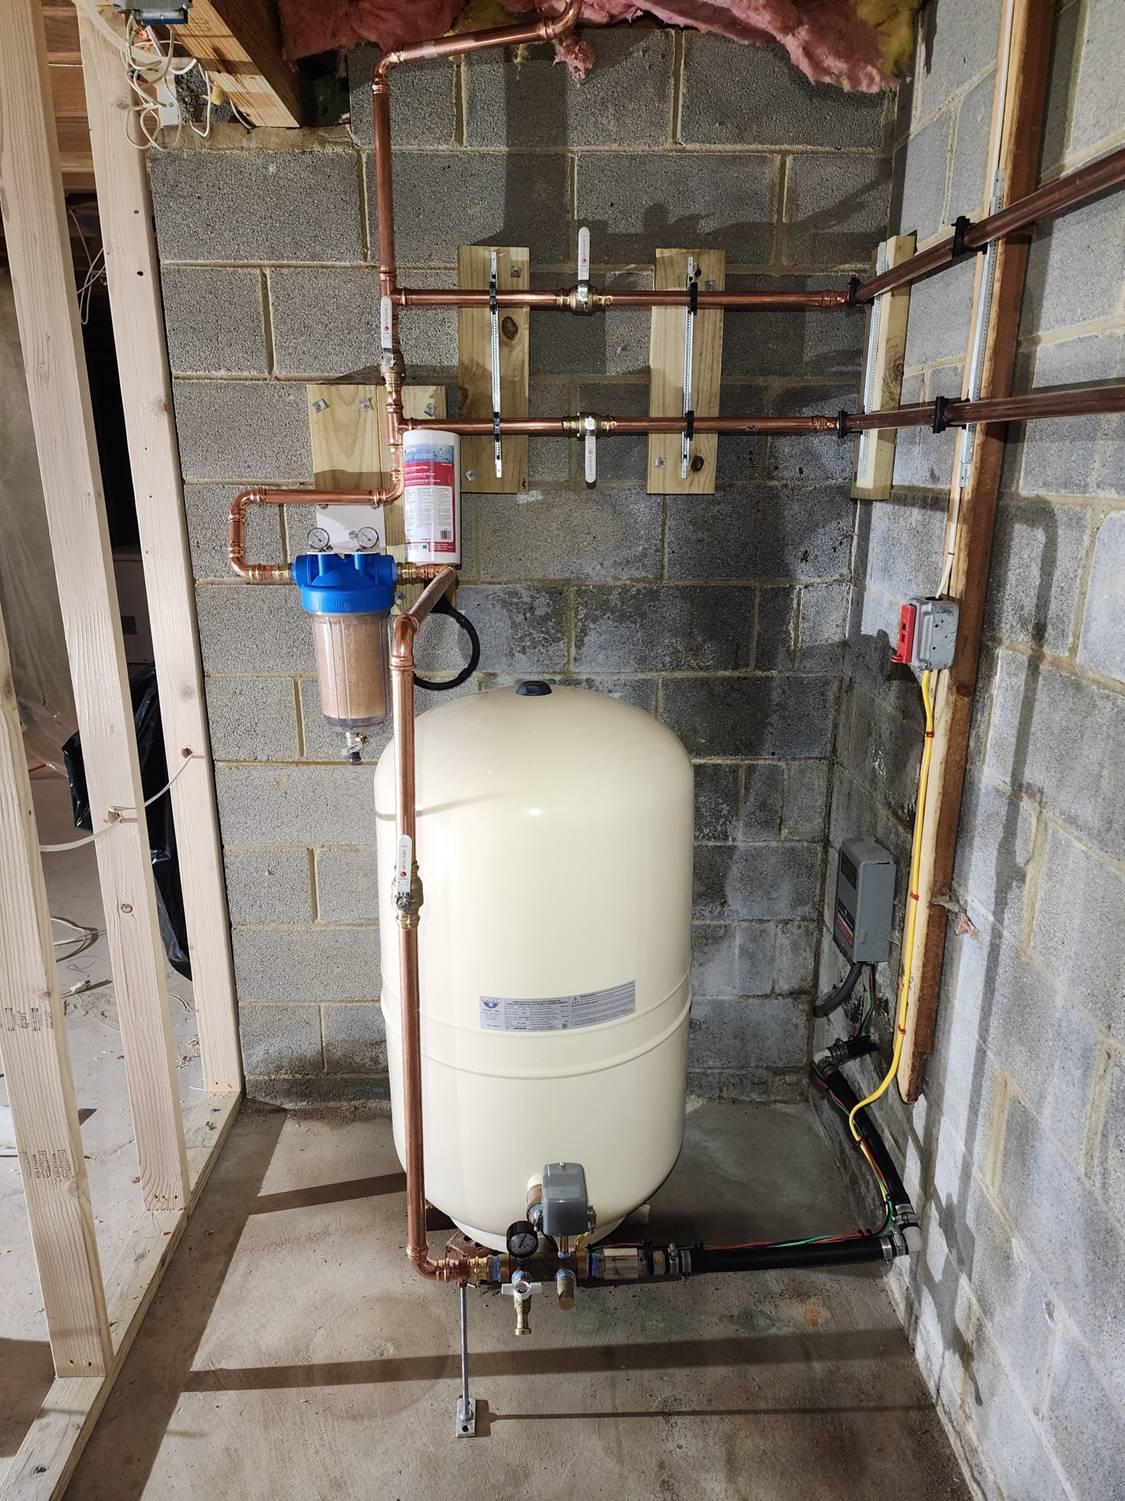 Expert well pump tank and whole-house filtration system installation by Applause Plumbing in Phillipsburg, NJ. Elevate your water quality with advanced plumbing technology for purity and safety in your home.